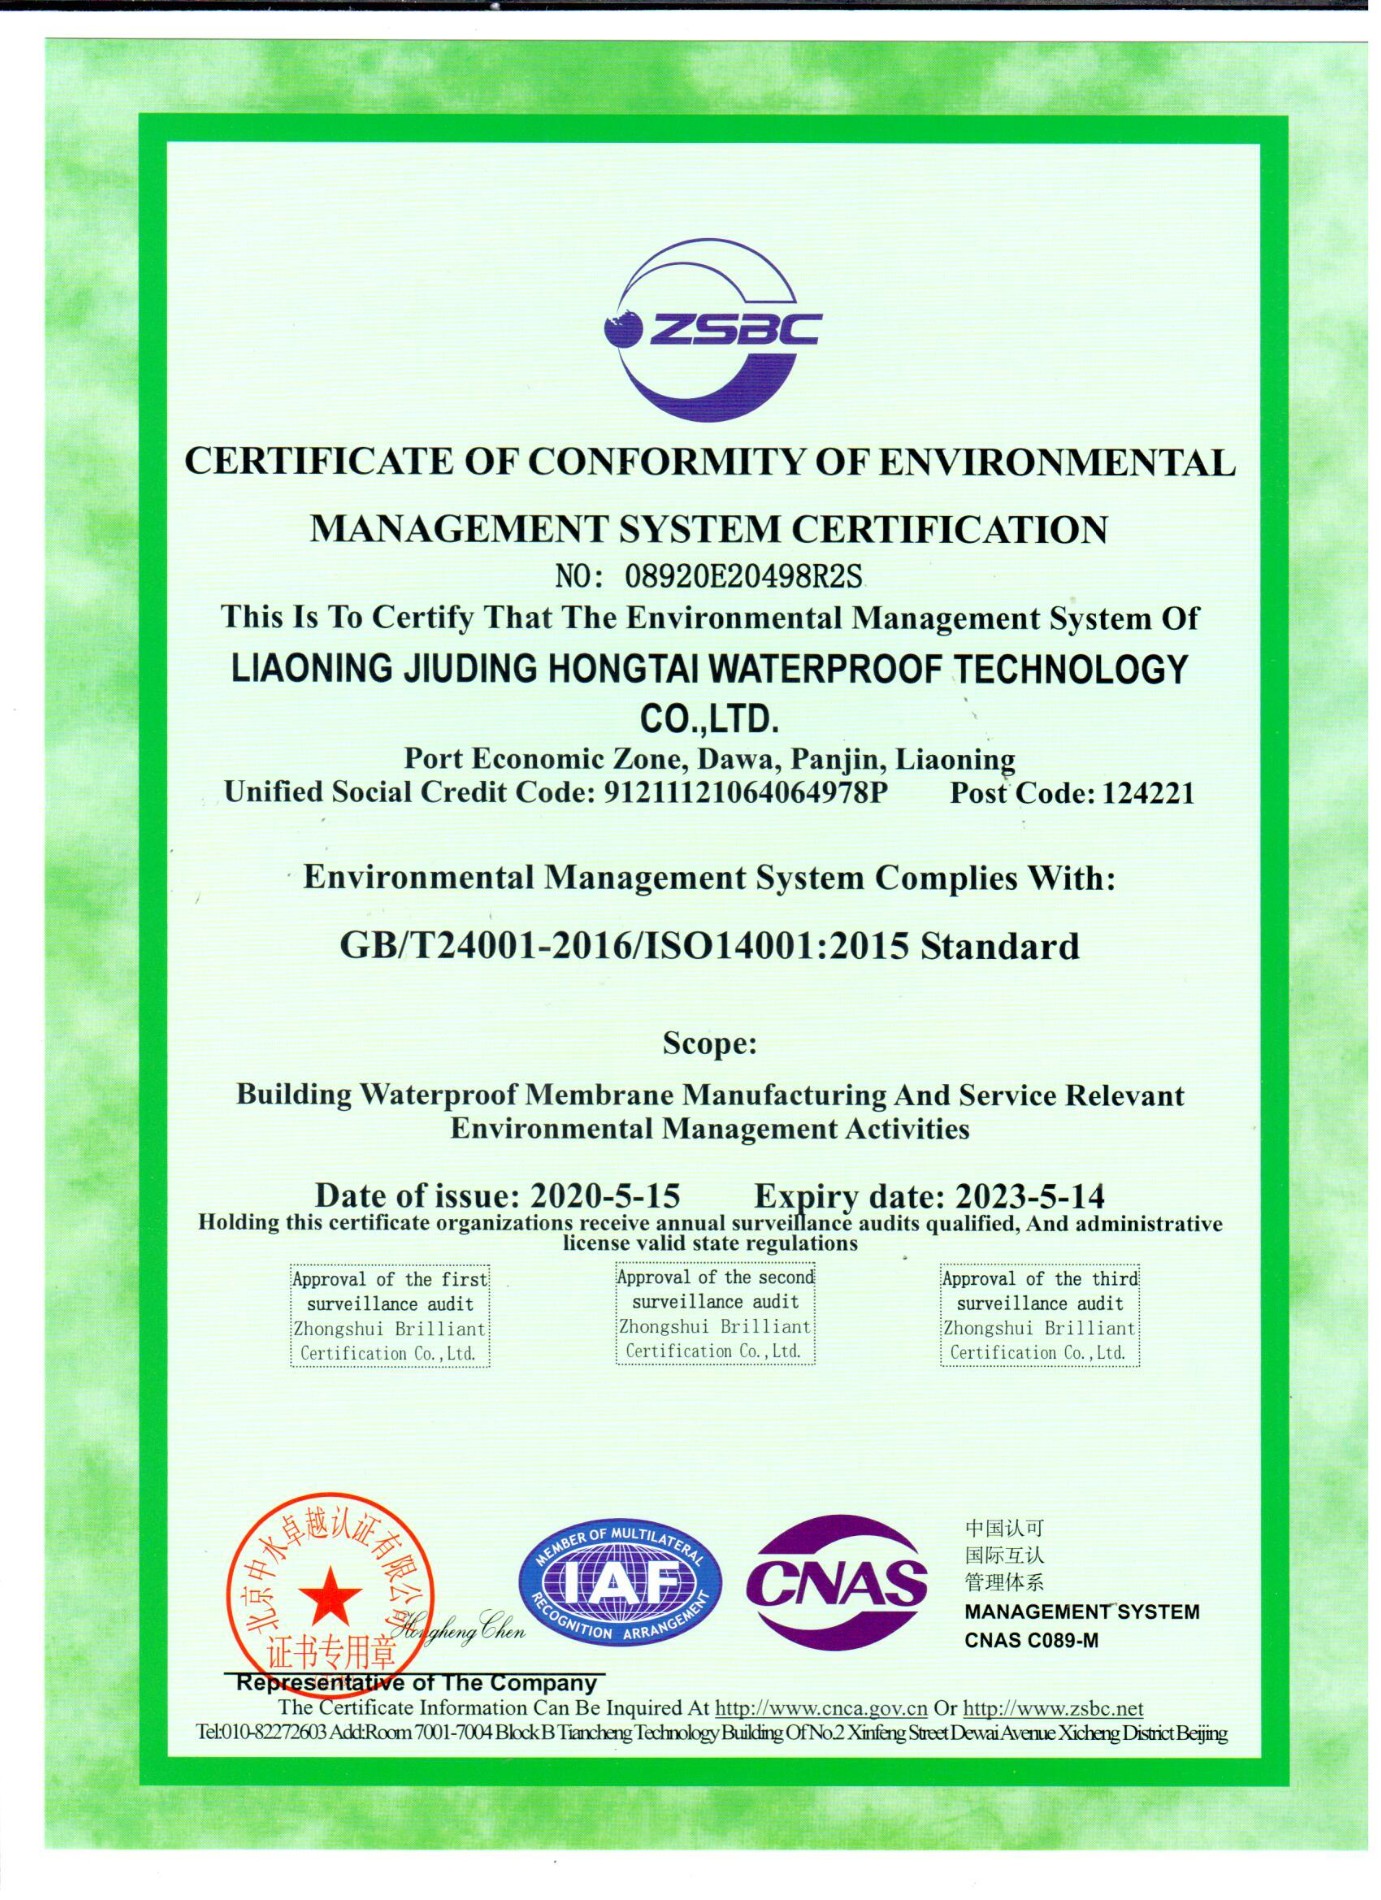 CERTIFICATE OF CONFORMITY OF ENVIRONMENTAL MANAGEMENT SYSTEM CERTIFICATION